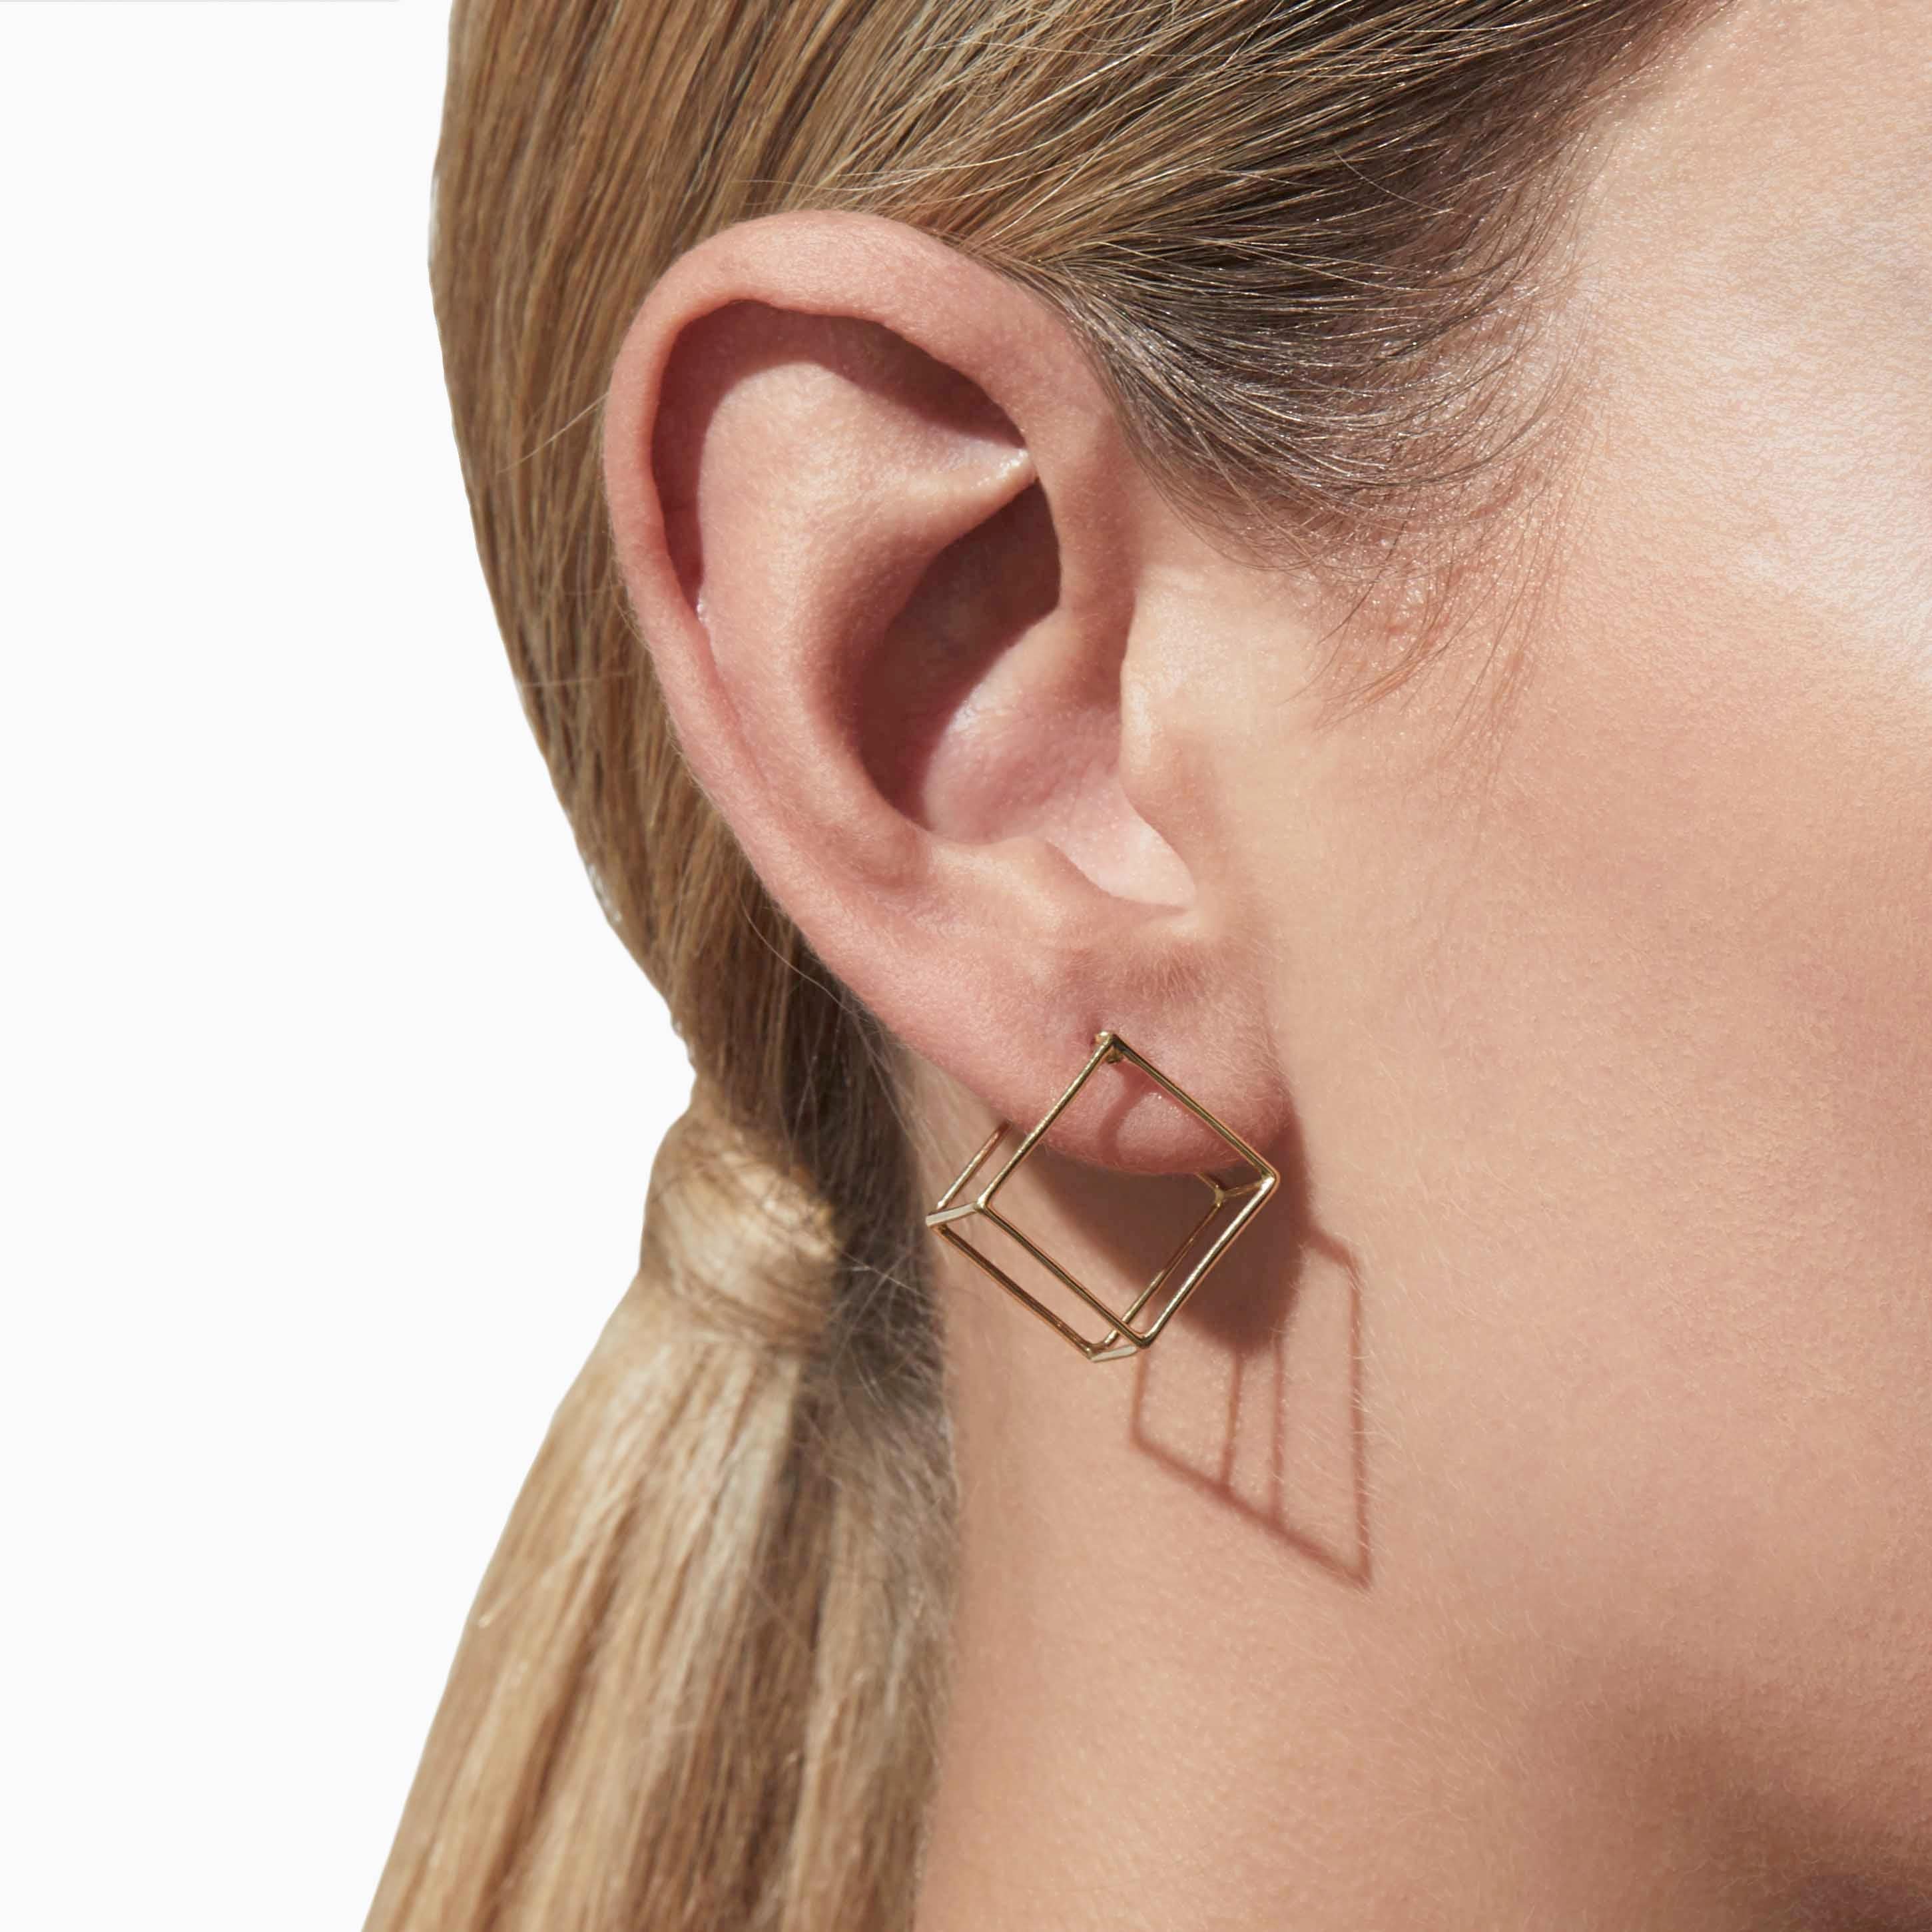 The three dimensional cubic form appears to float seamlessly around the earlobe when worn. A great size for daily use. One side is an earring post. You can alter the point at which the earring hangs depending on how you want it to appear.

18 Karat